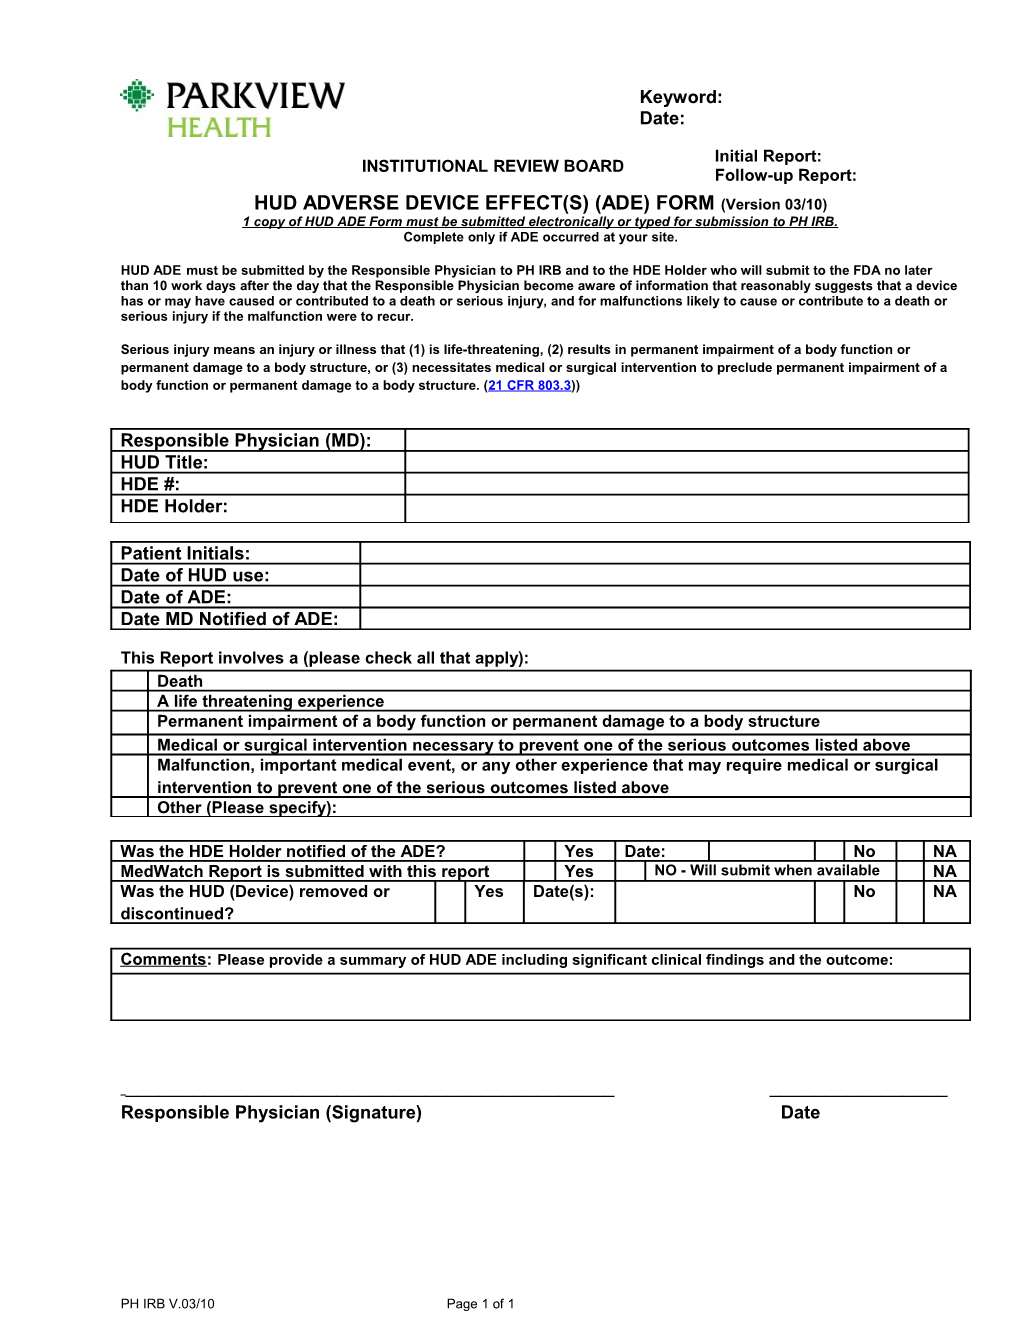 HUD Adverse Device Effects (ADE) Form